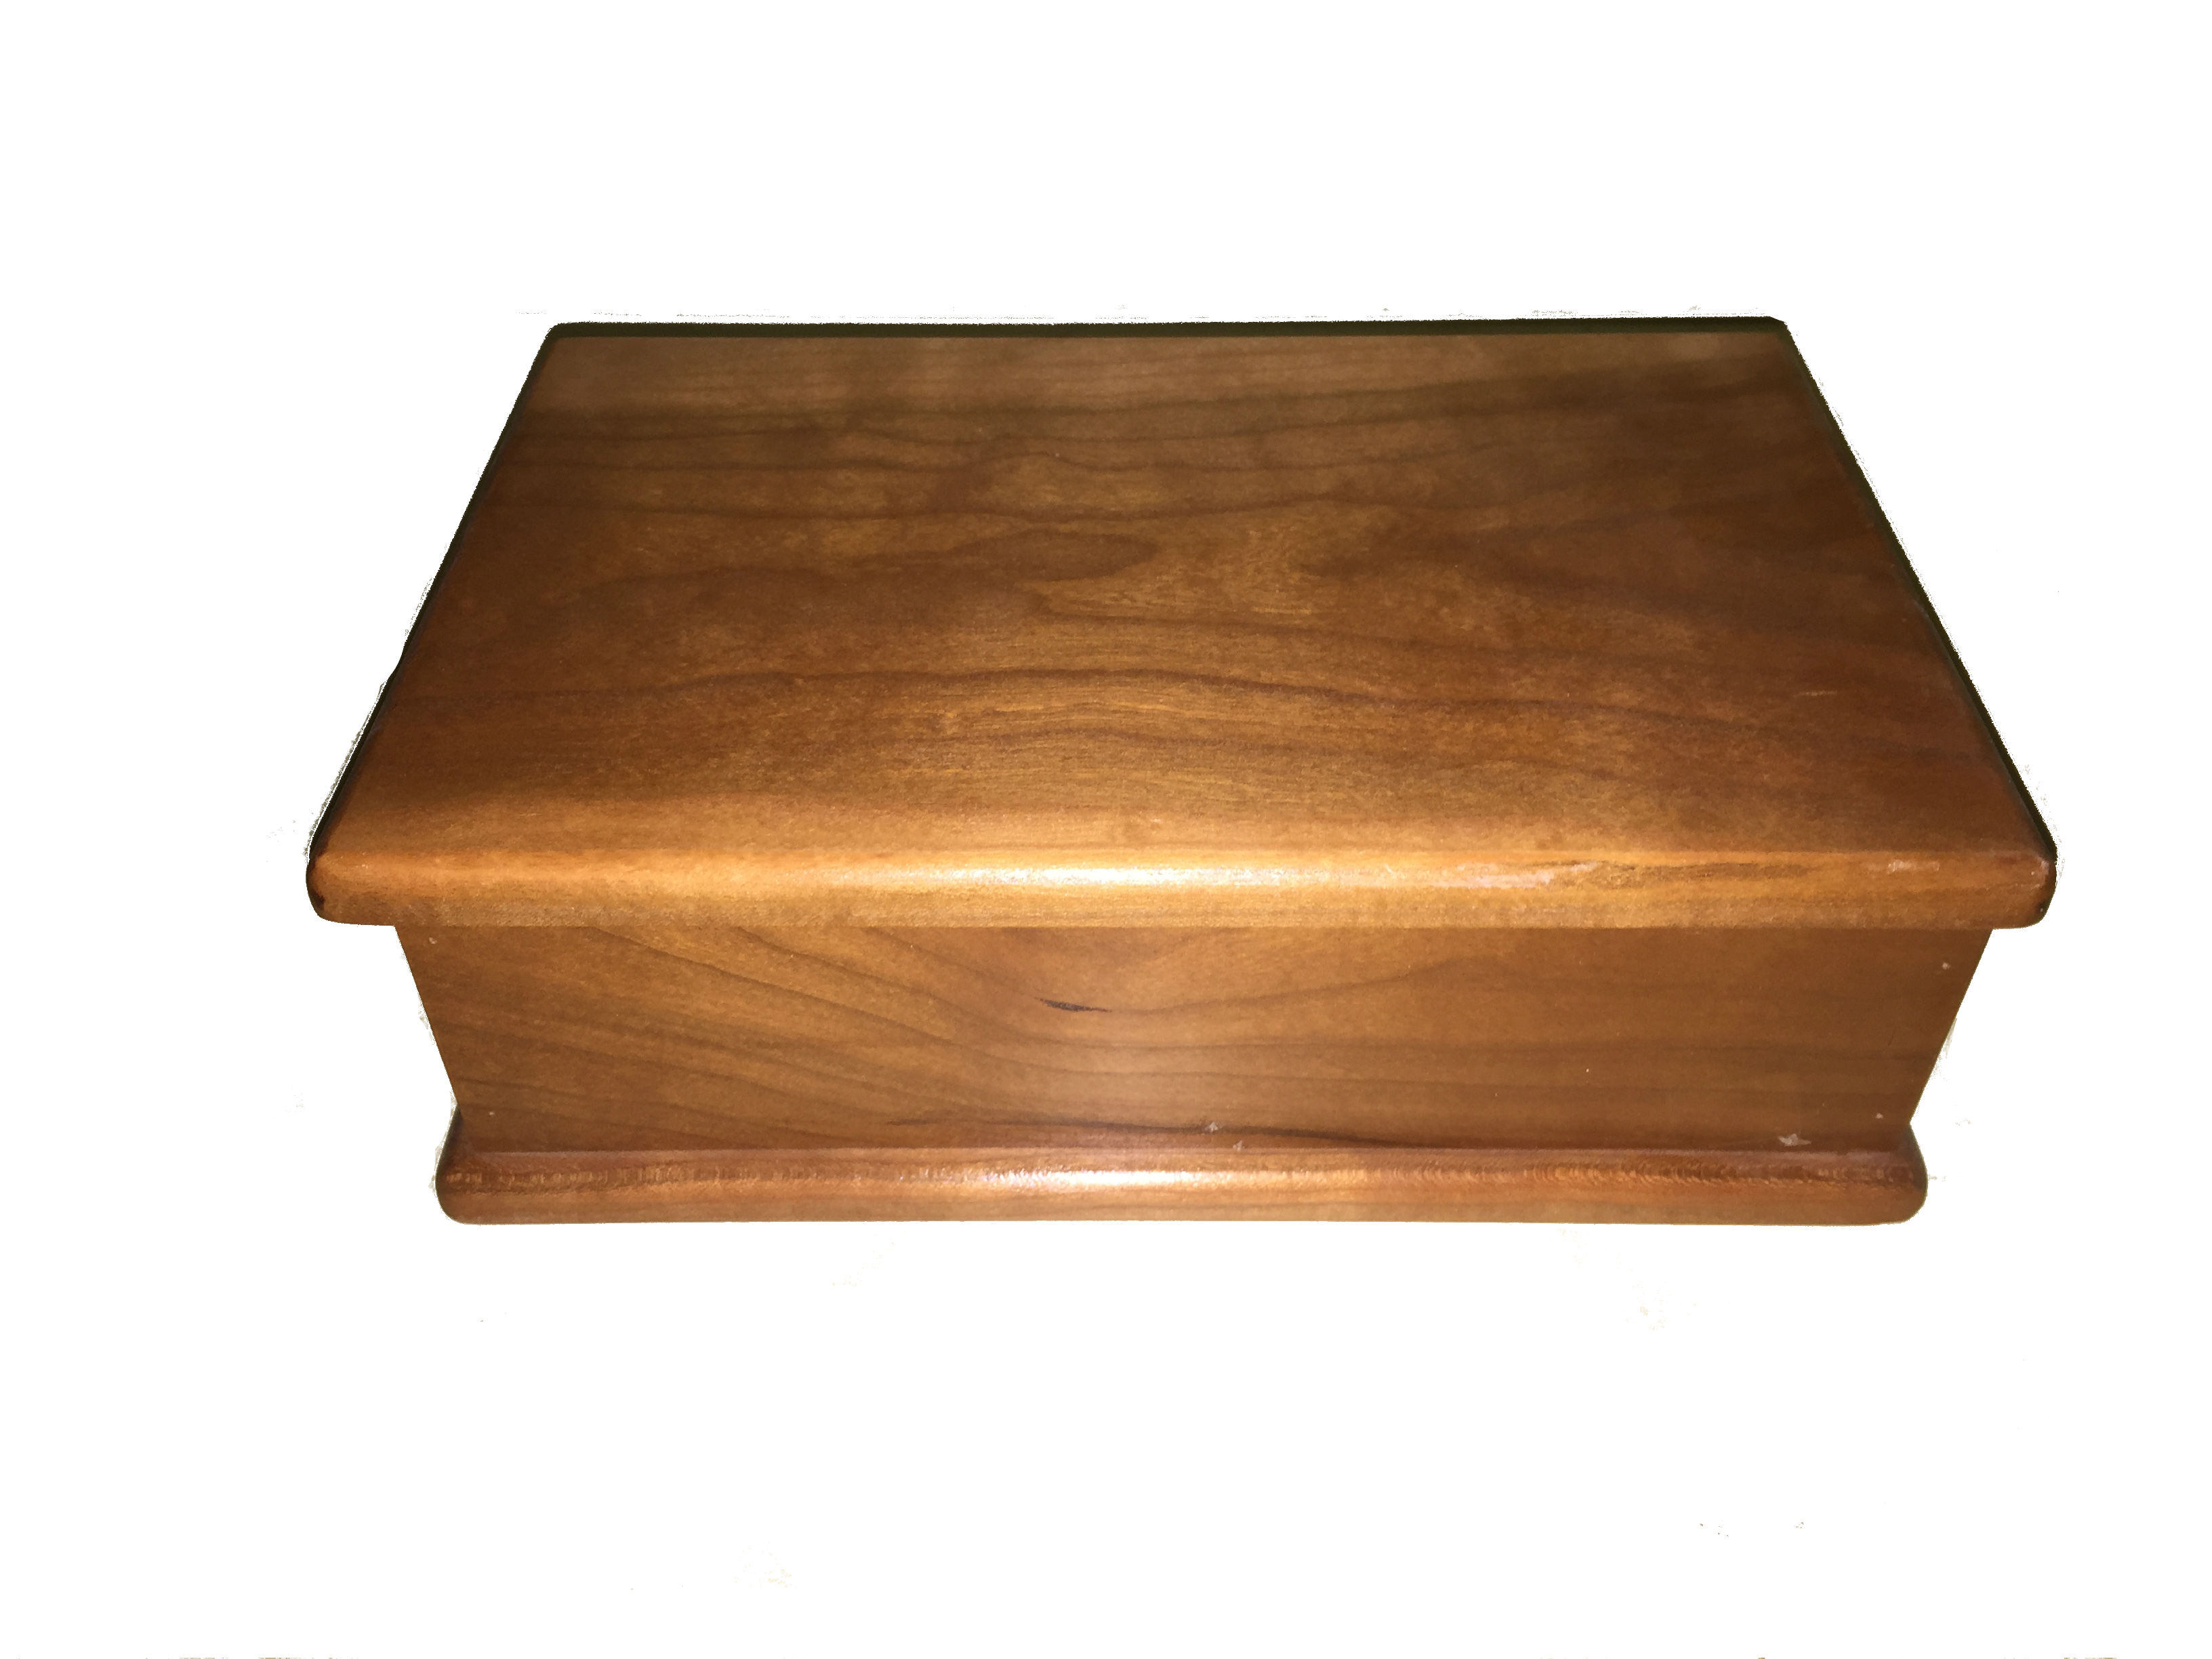 Diy Wooden Box With Hinged Lid Wooden Box With Tray And Hinged Lid Of